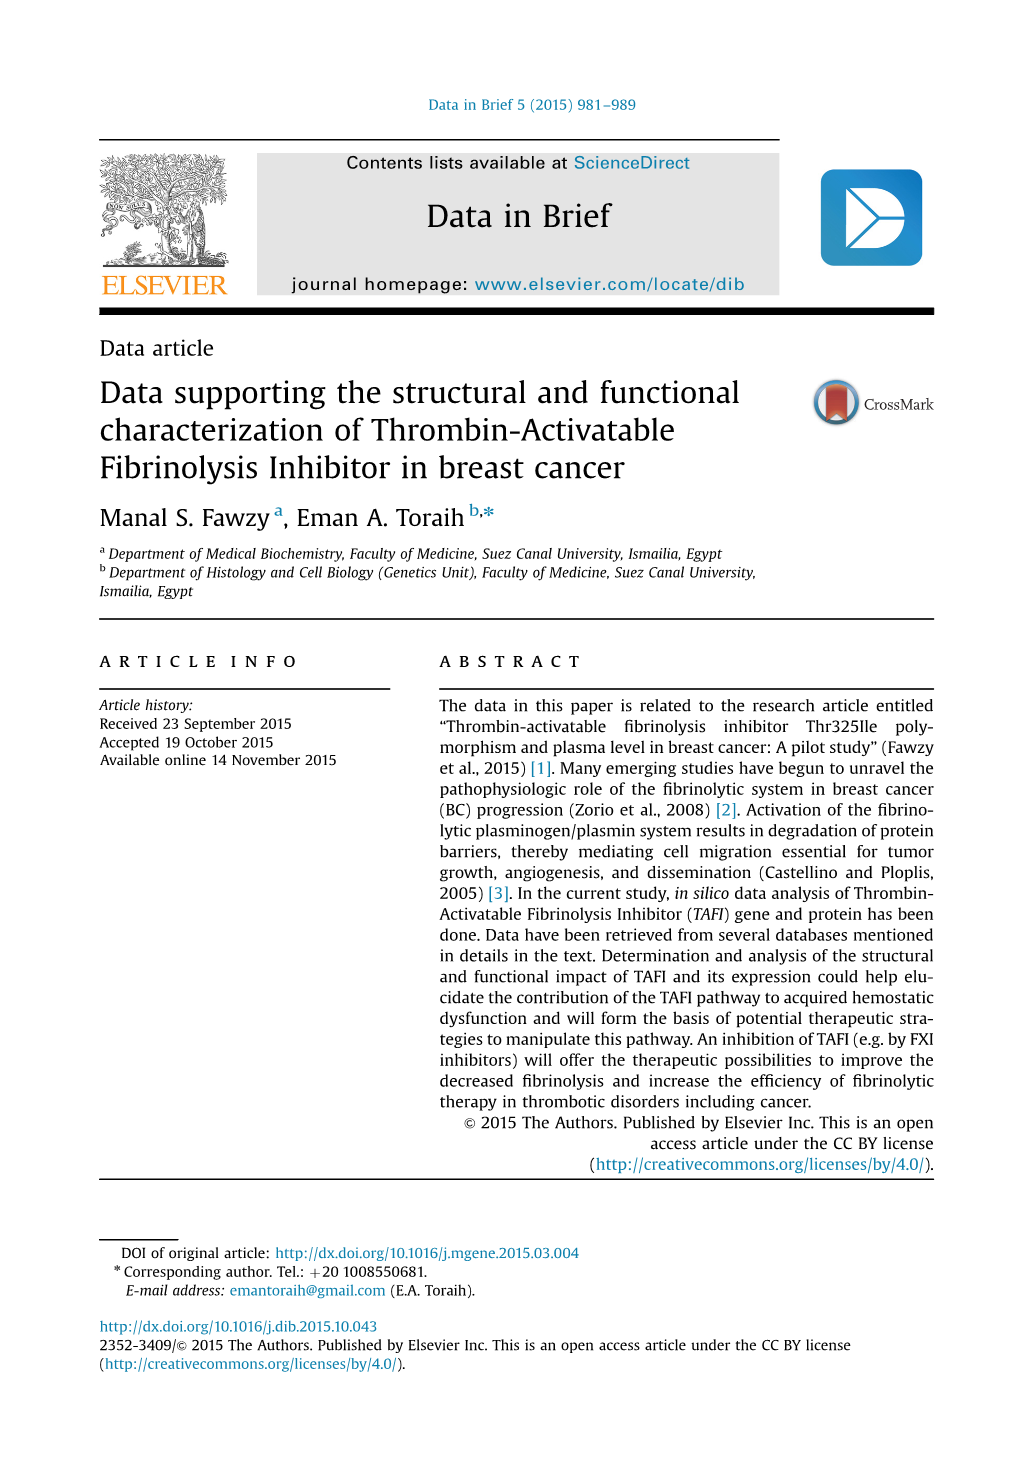 Data Supporting the Structural and Functional Characterization of Thrombin‐Activatable Fibrinolysis Inhibitor in Breast Cancer